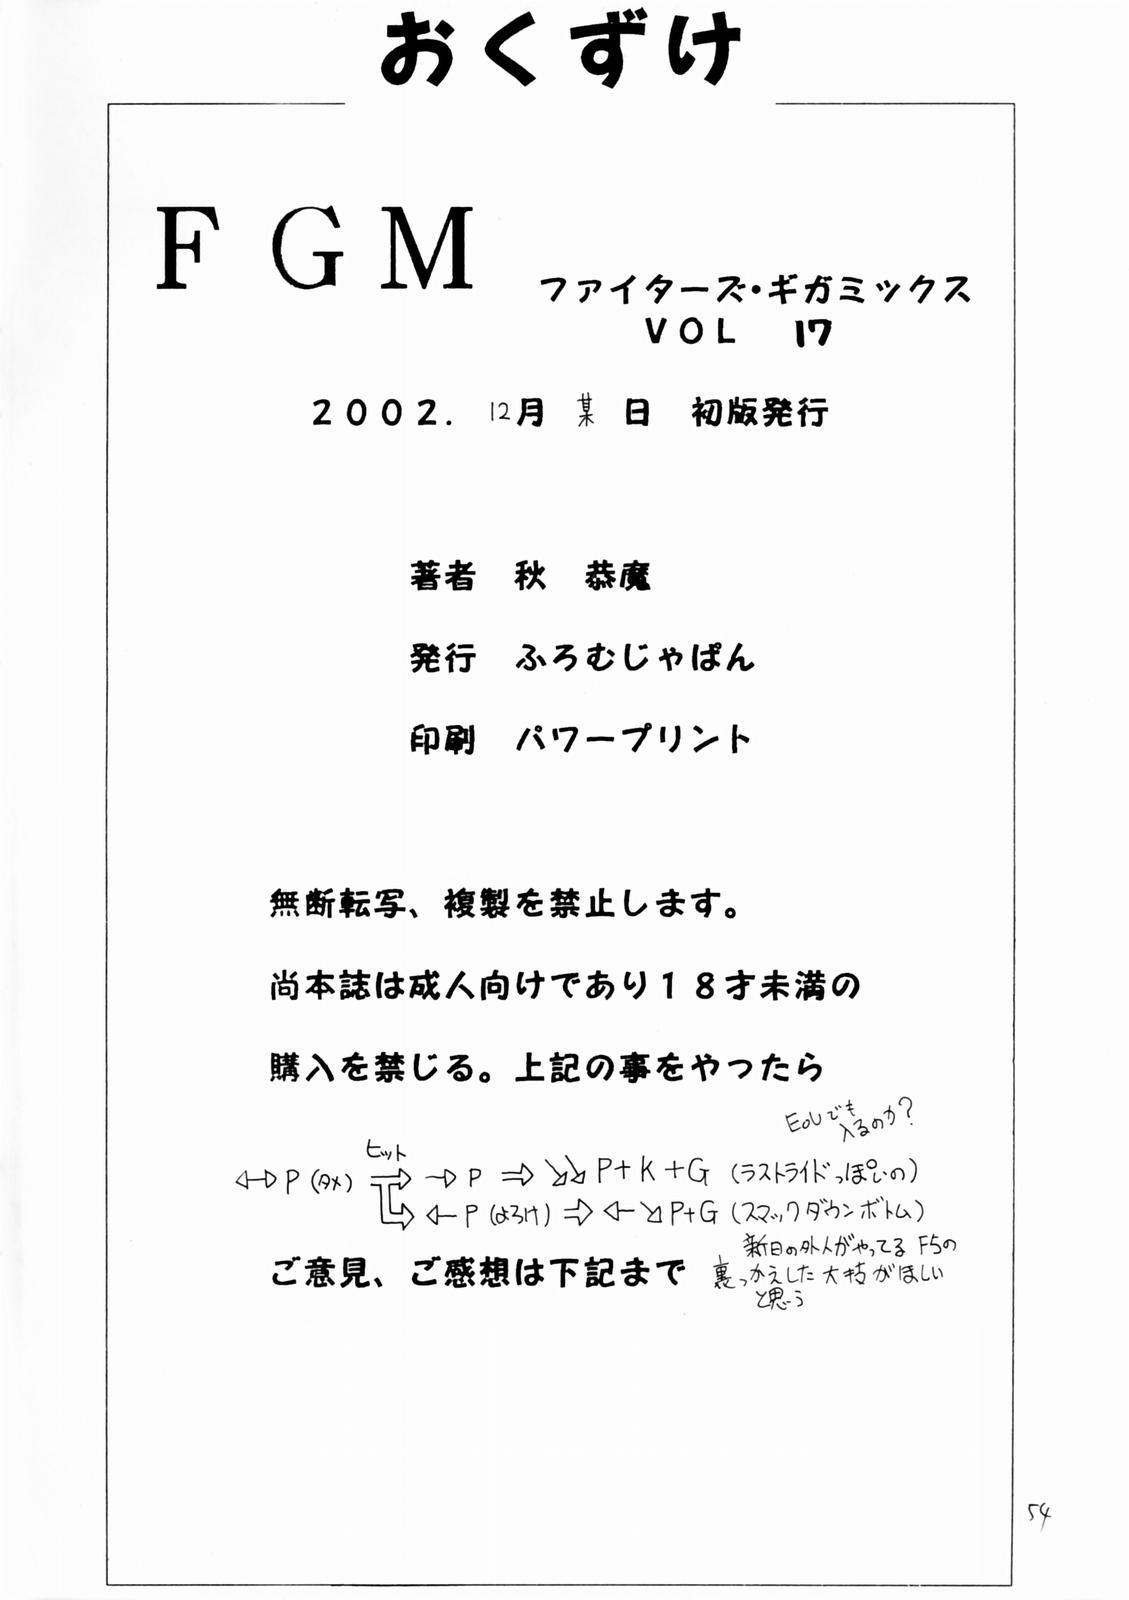 FIGHTERS GIGAMIX Vol. 17 52